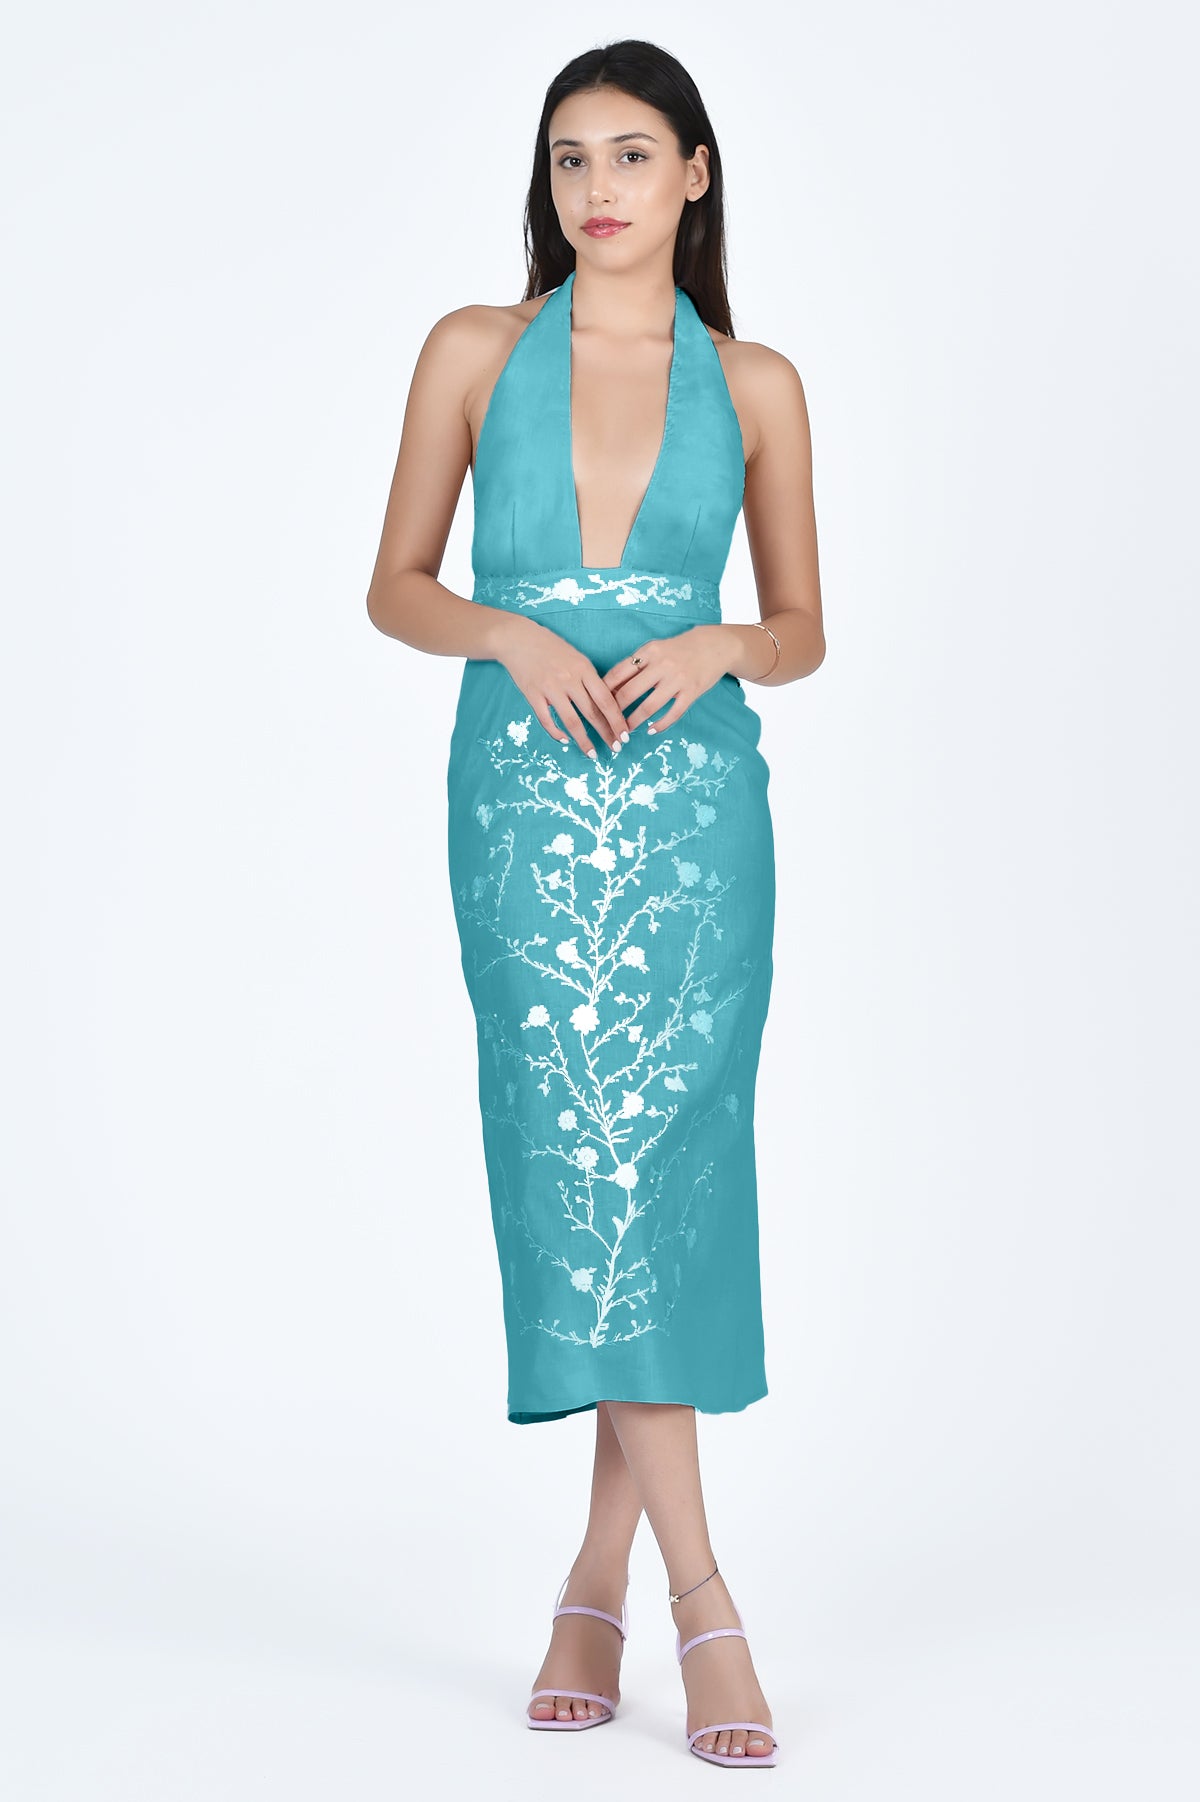 Fanm Mon Karla Cotton Halter Dress in Teal with Tree of Life Embroidery Details 